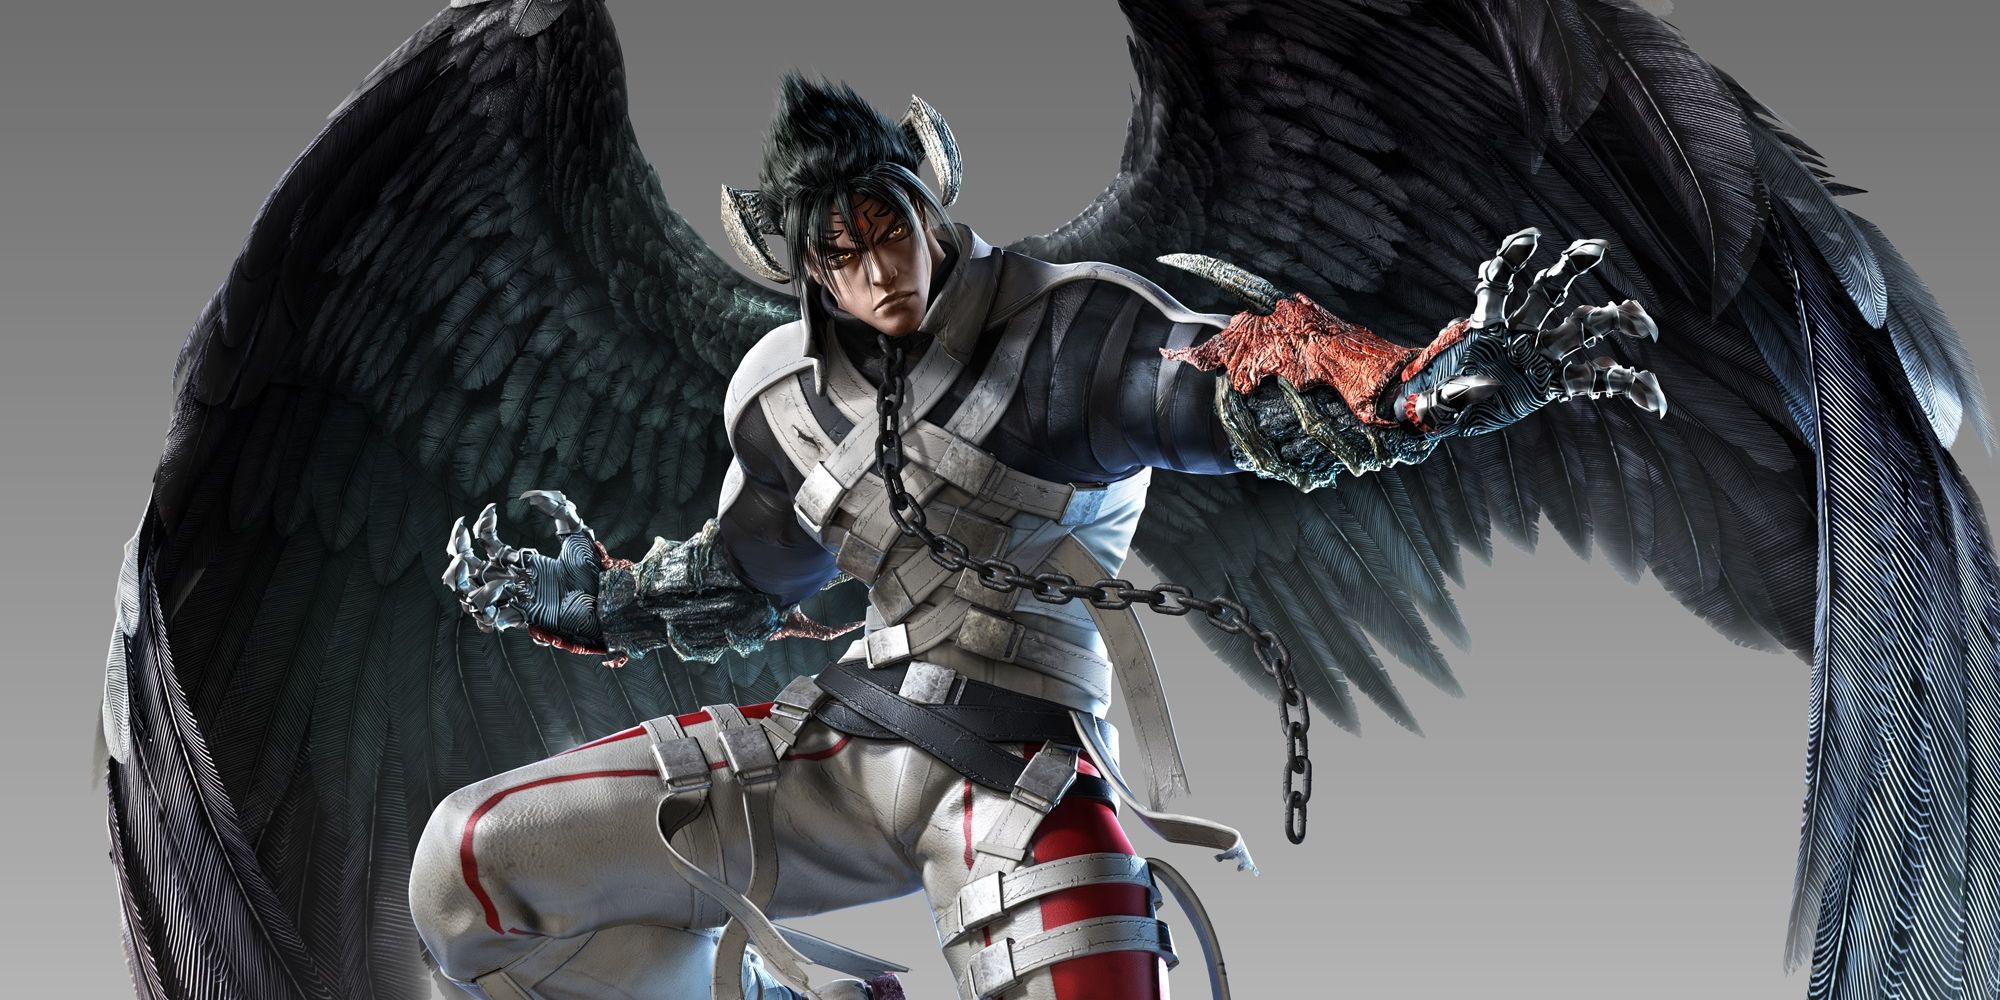 Devil Jin, a demonic version of Jin Kazama, hovers on black wings with arms outstretched.